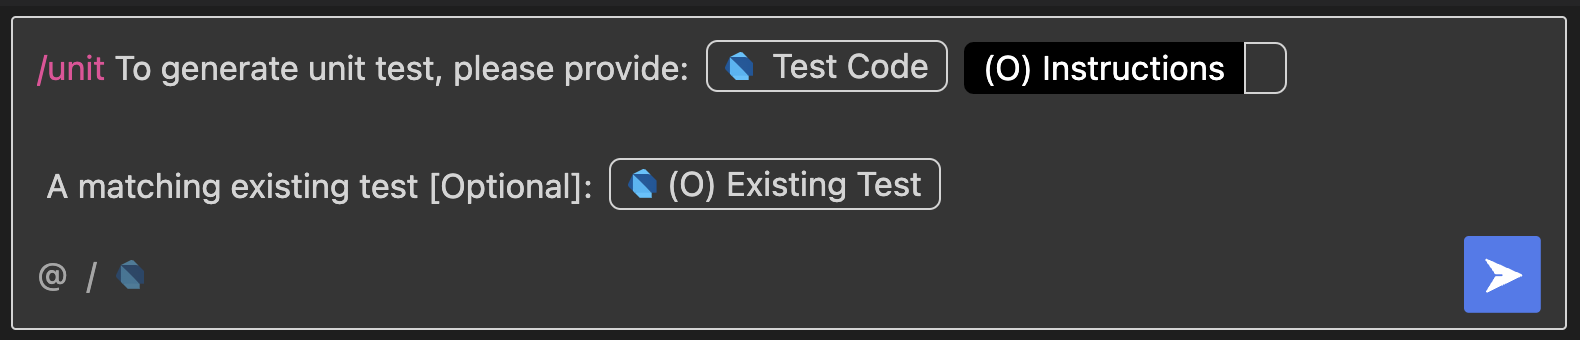 Code and String inputs to generate unit tests